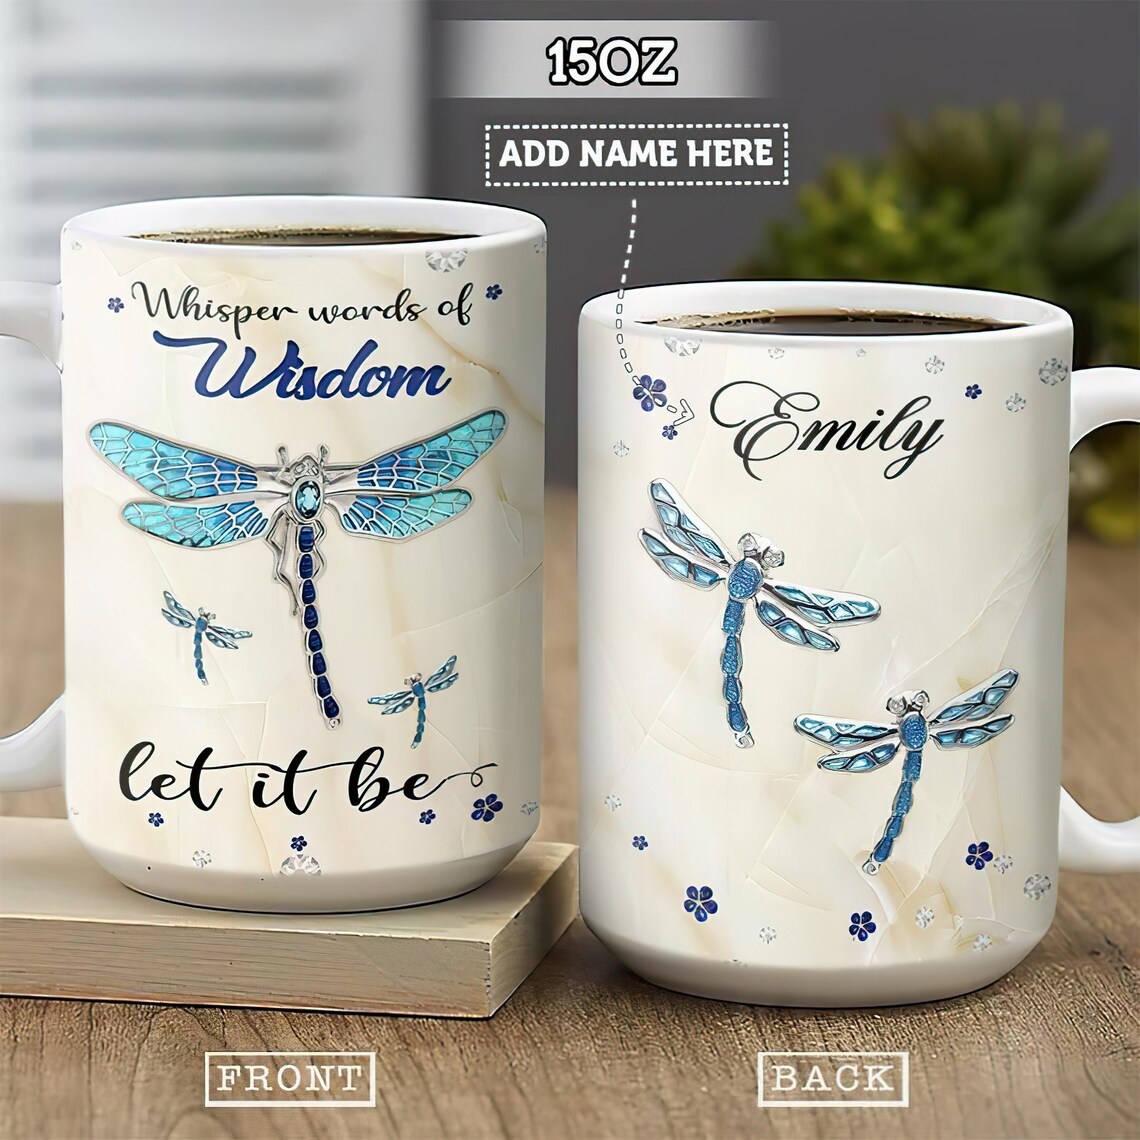 https://betitistore.com/wp-content/uploads/2022/06/dragonfly_jewelry_style_personalized_full_color_ceramic_mug_1846.jpg